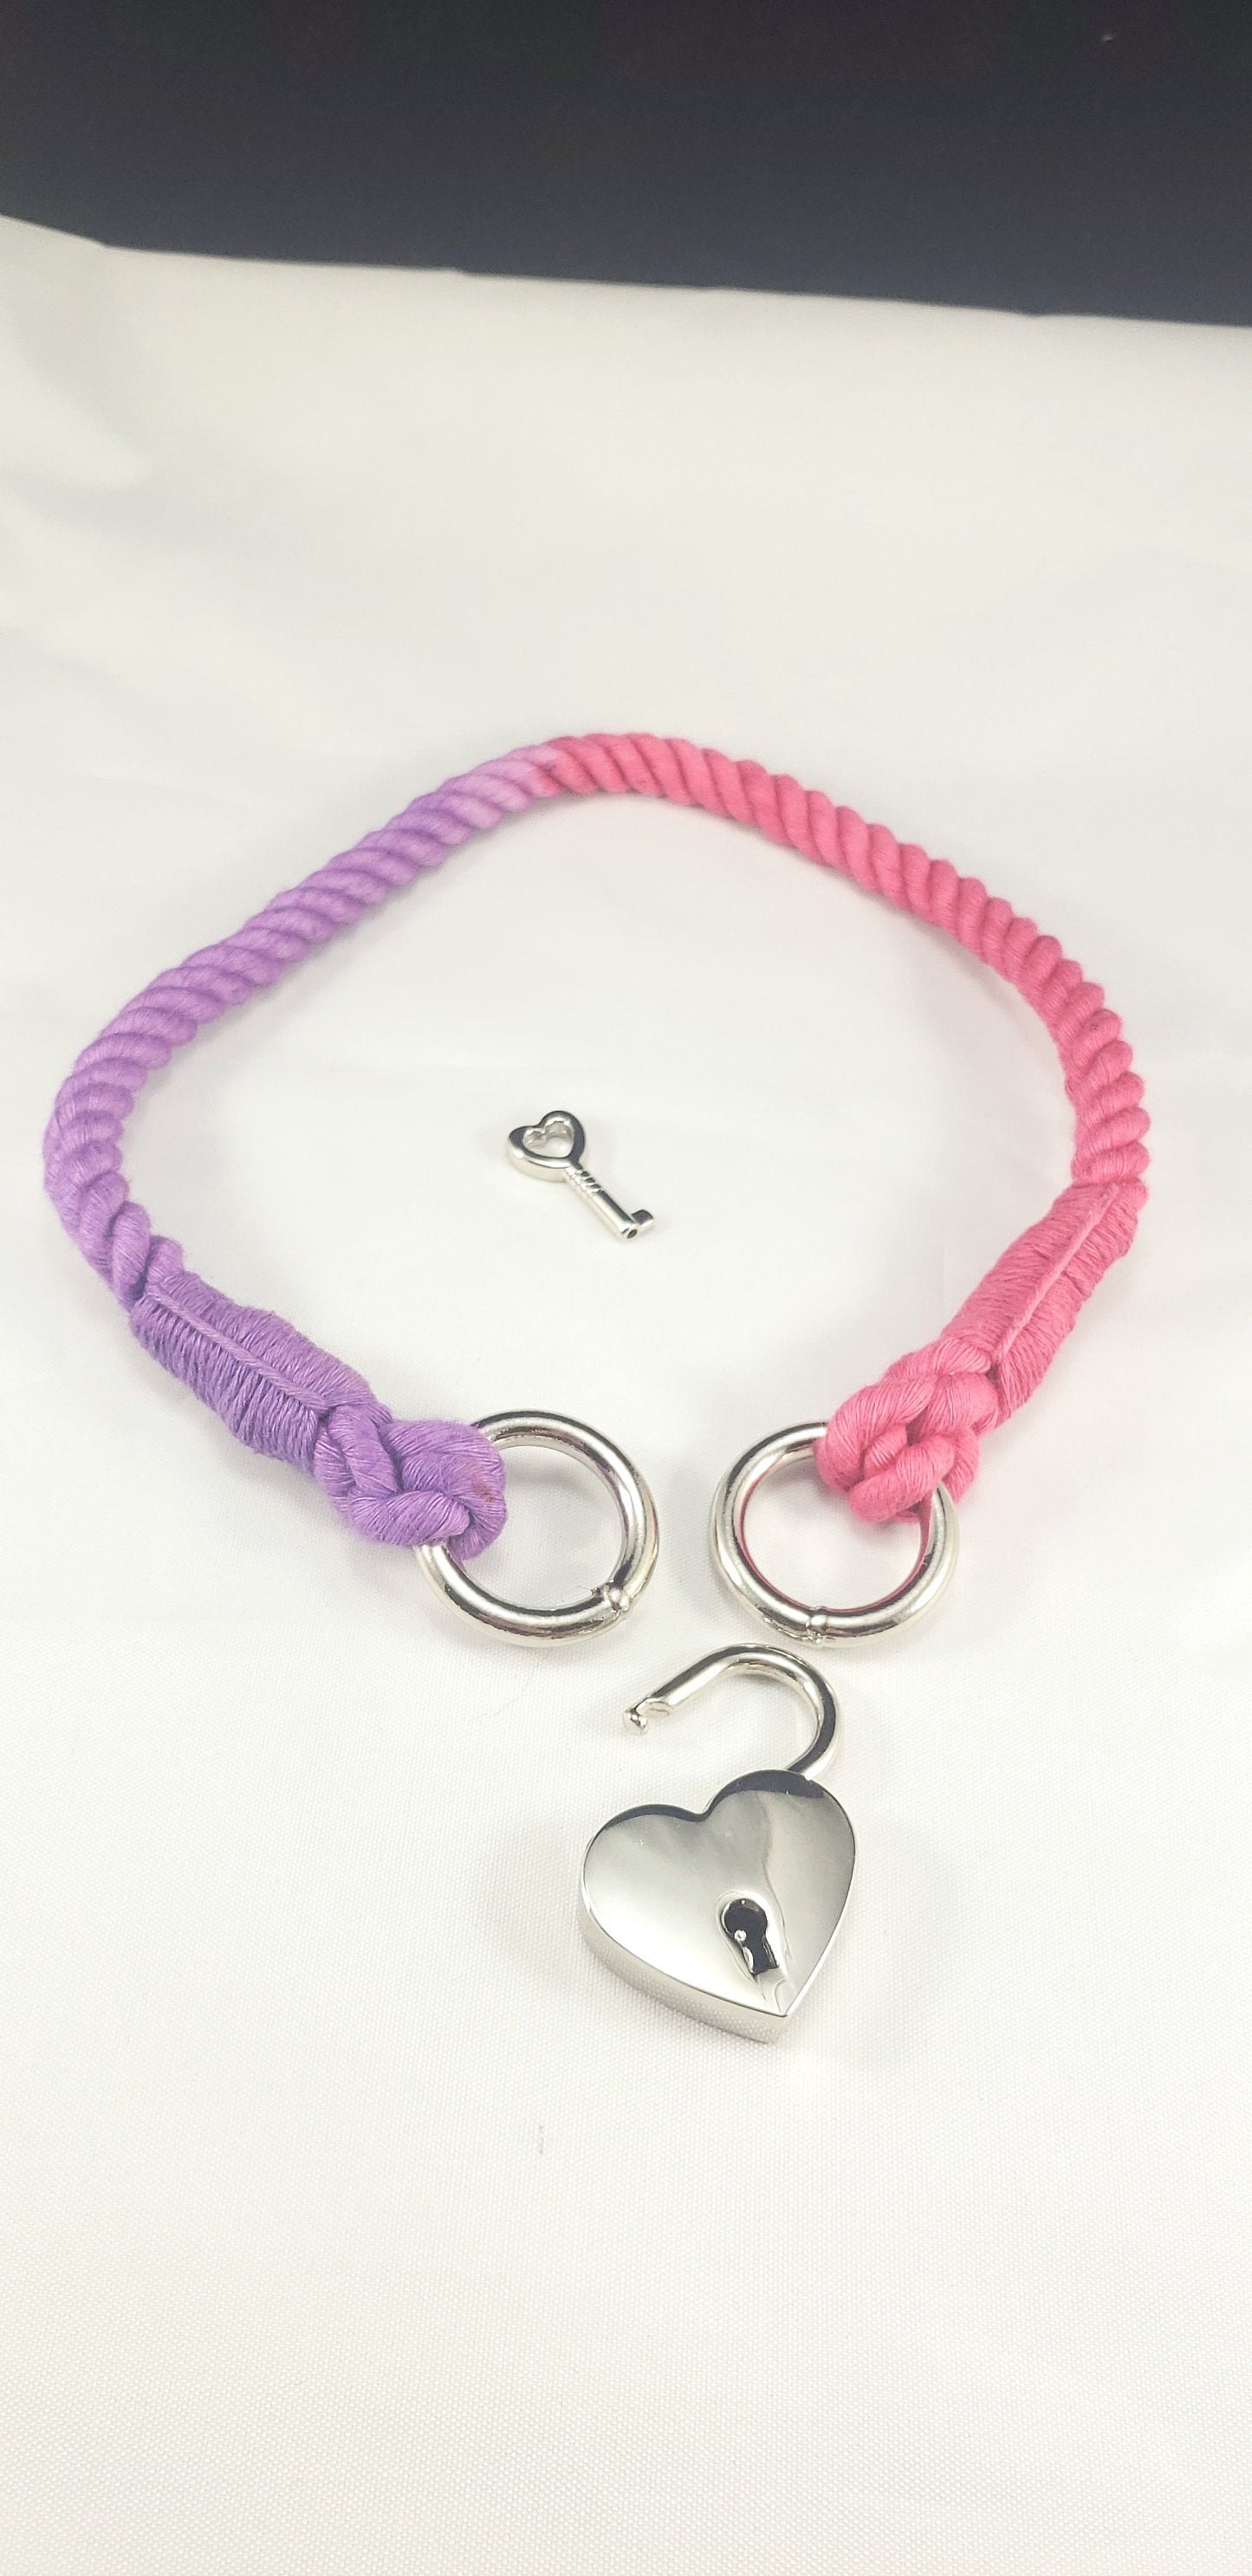 Purple and Red Pet Play Rope Heart Locking Collar - Submissive Cotton Collar | Novelty Collar Accessory for Roleplay